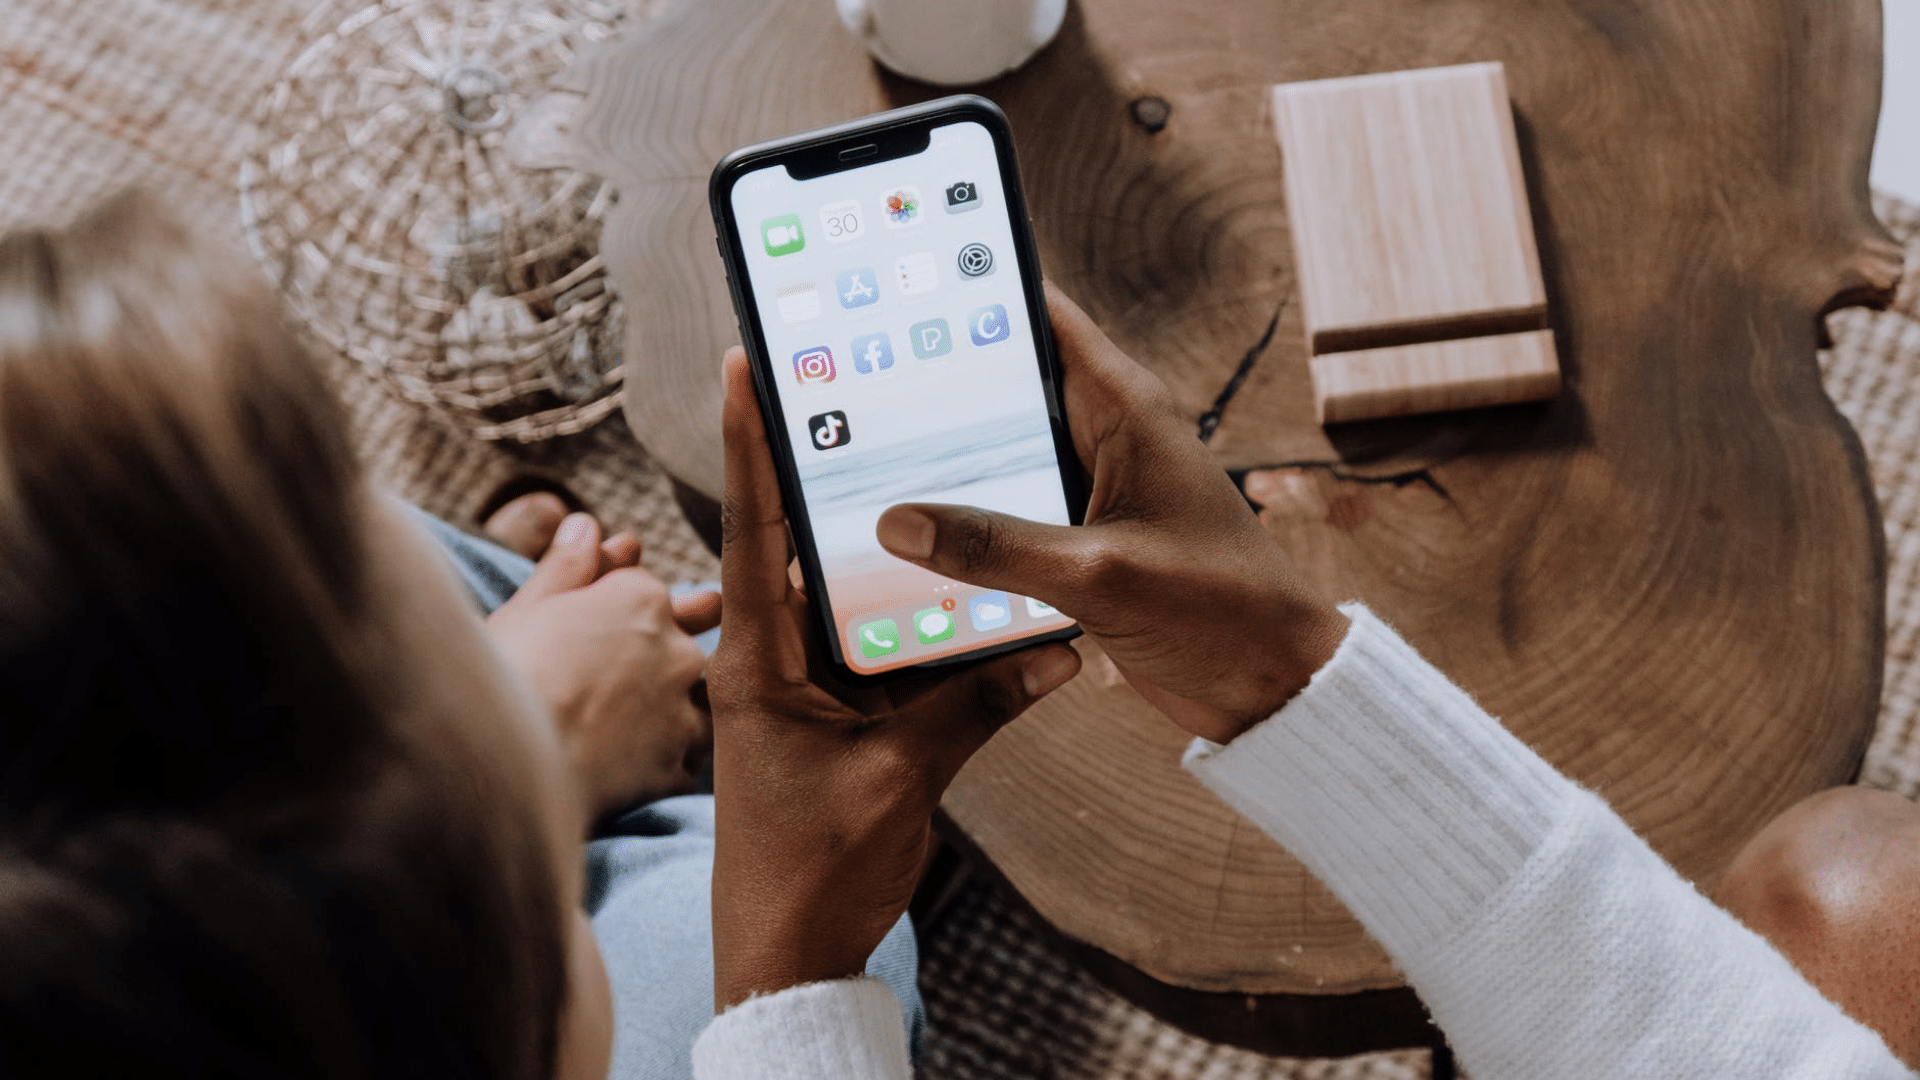 25 Tips to Customize Your iPhone's Home Screen Like a Pro in 2022